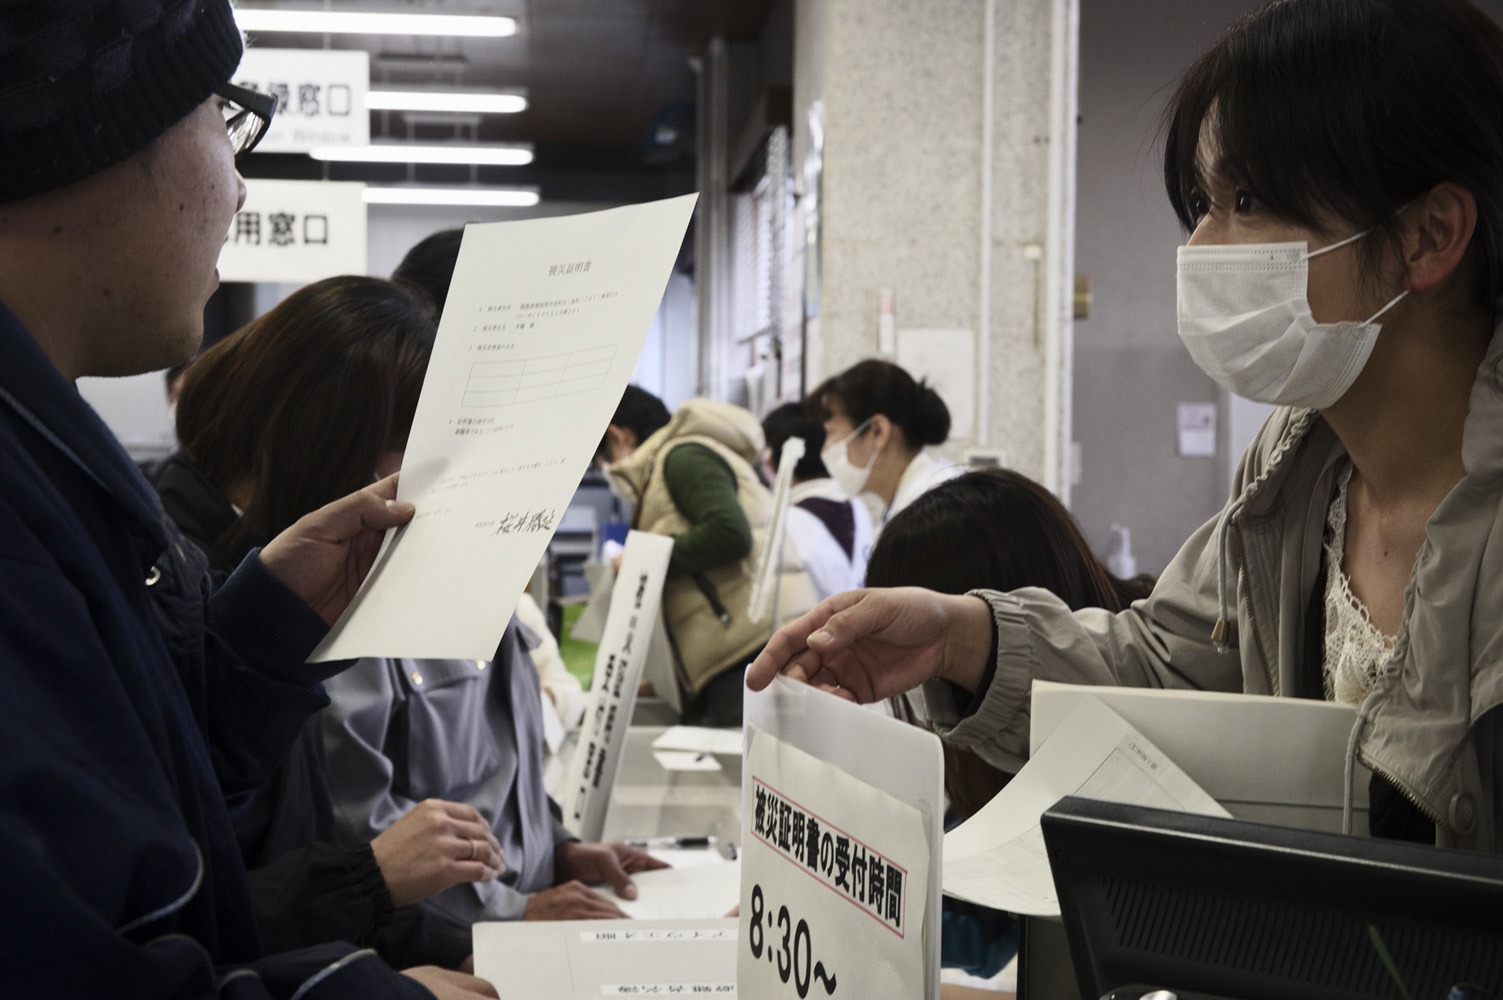 Minamisoma,  Japan, 4 april 2011 Minamisoma residents affected by the ongoing disaster in the Fukushima region are submitting damages report forms to the local government. Greenpeace is conducting radiation sampling in the Fukushima area to ensure further concern about public health and safety considerations are sufficiently met.